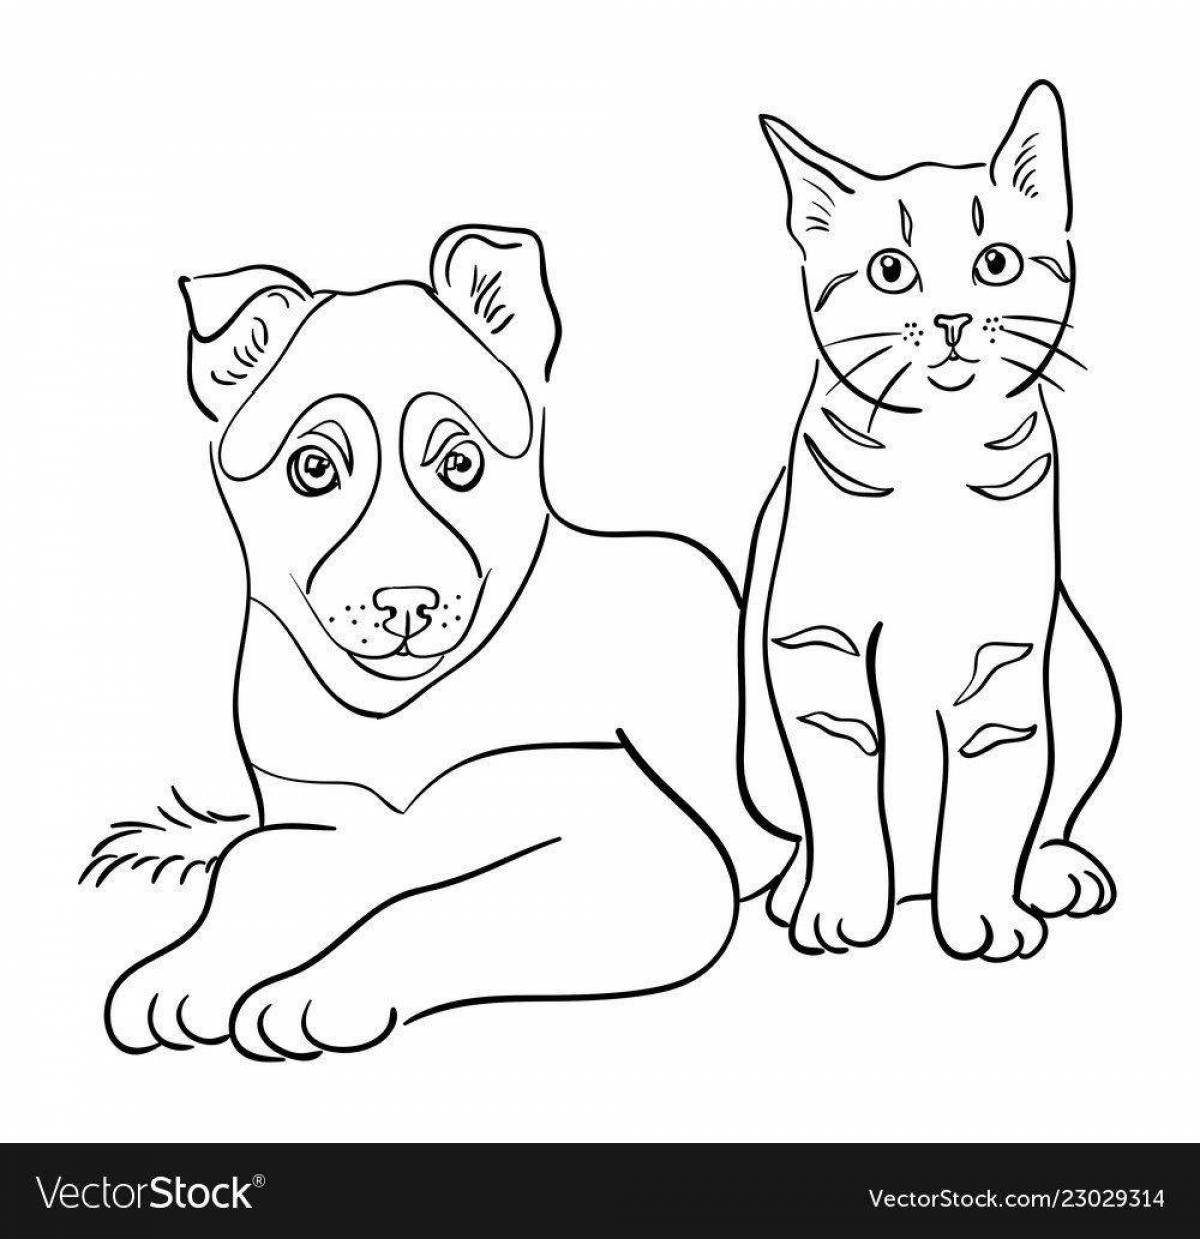 Coloring live cat and dog together